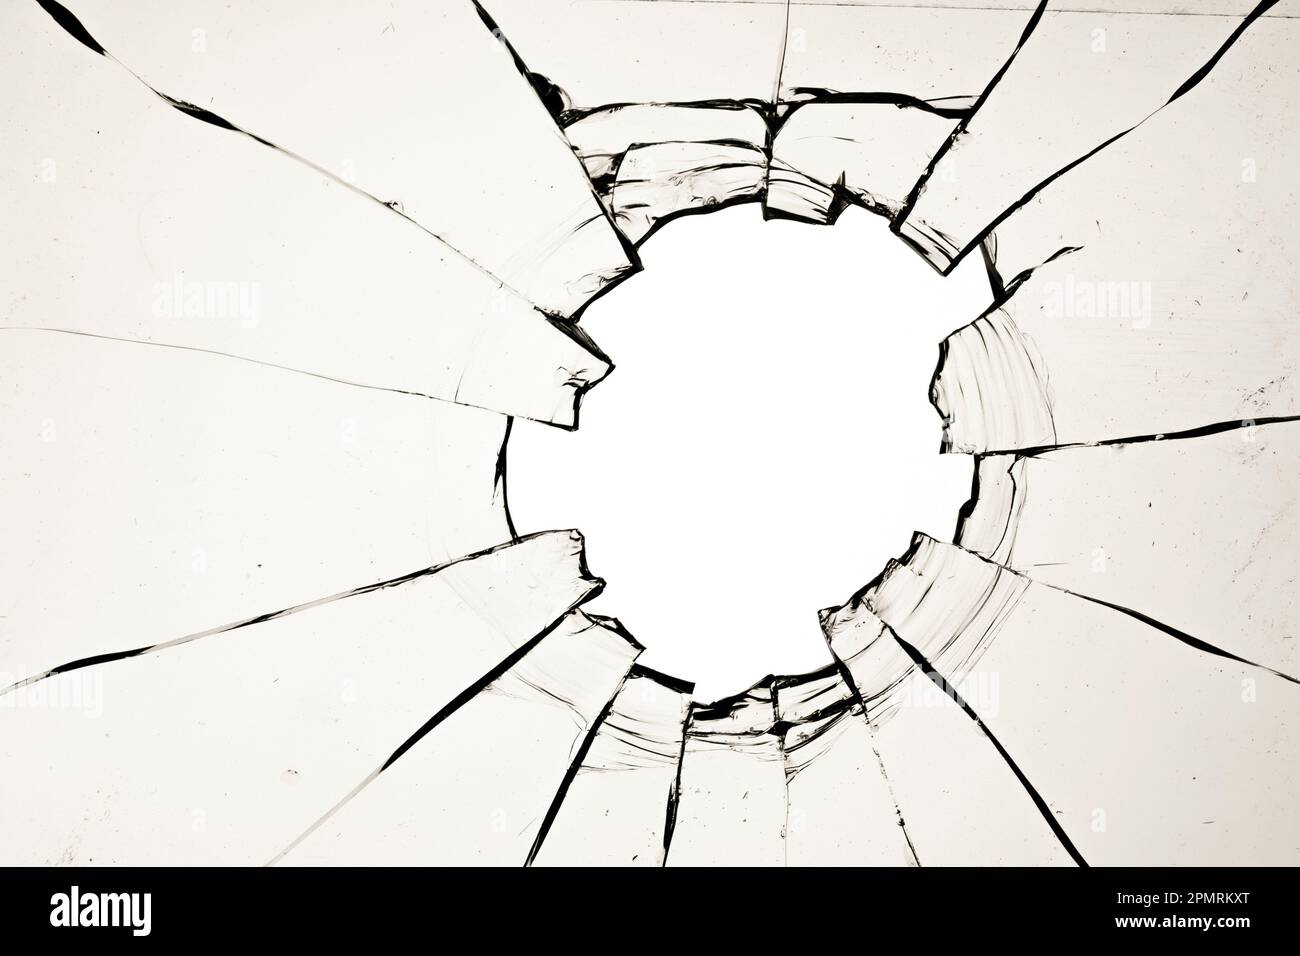 A hole in the window, cracks in the glass. The effect of a broken window texture on a white background Stock Photo